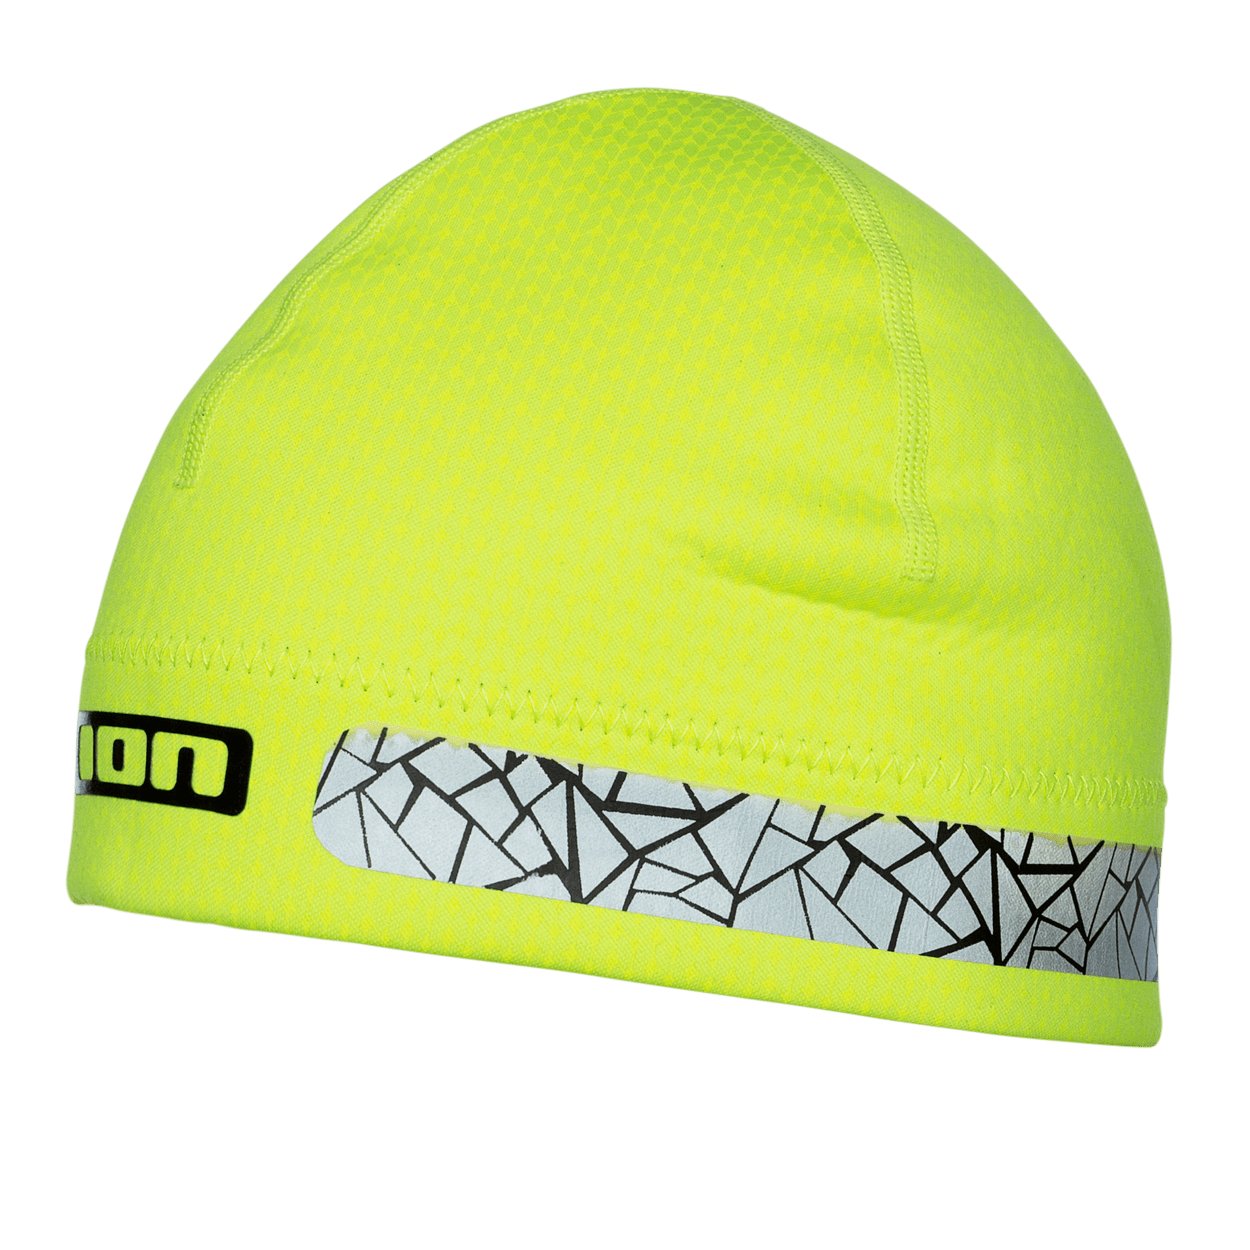 ION Safety Beanie 2022 - Worthing Watersports - 9008415606641 - Neo Accessories - ION Water